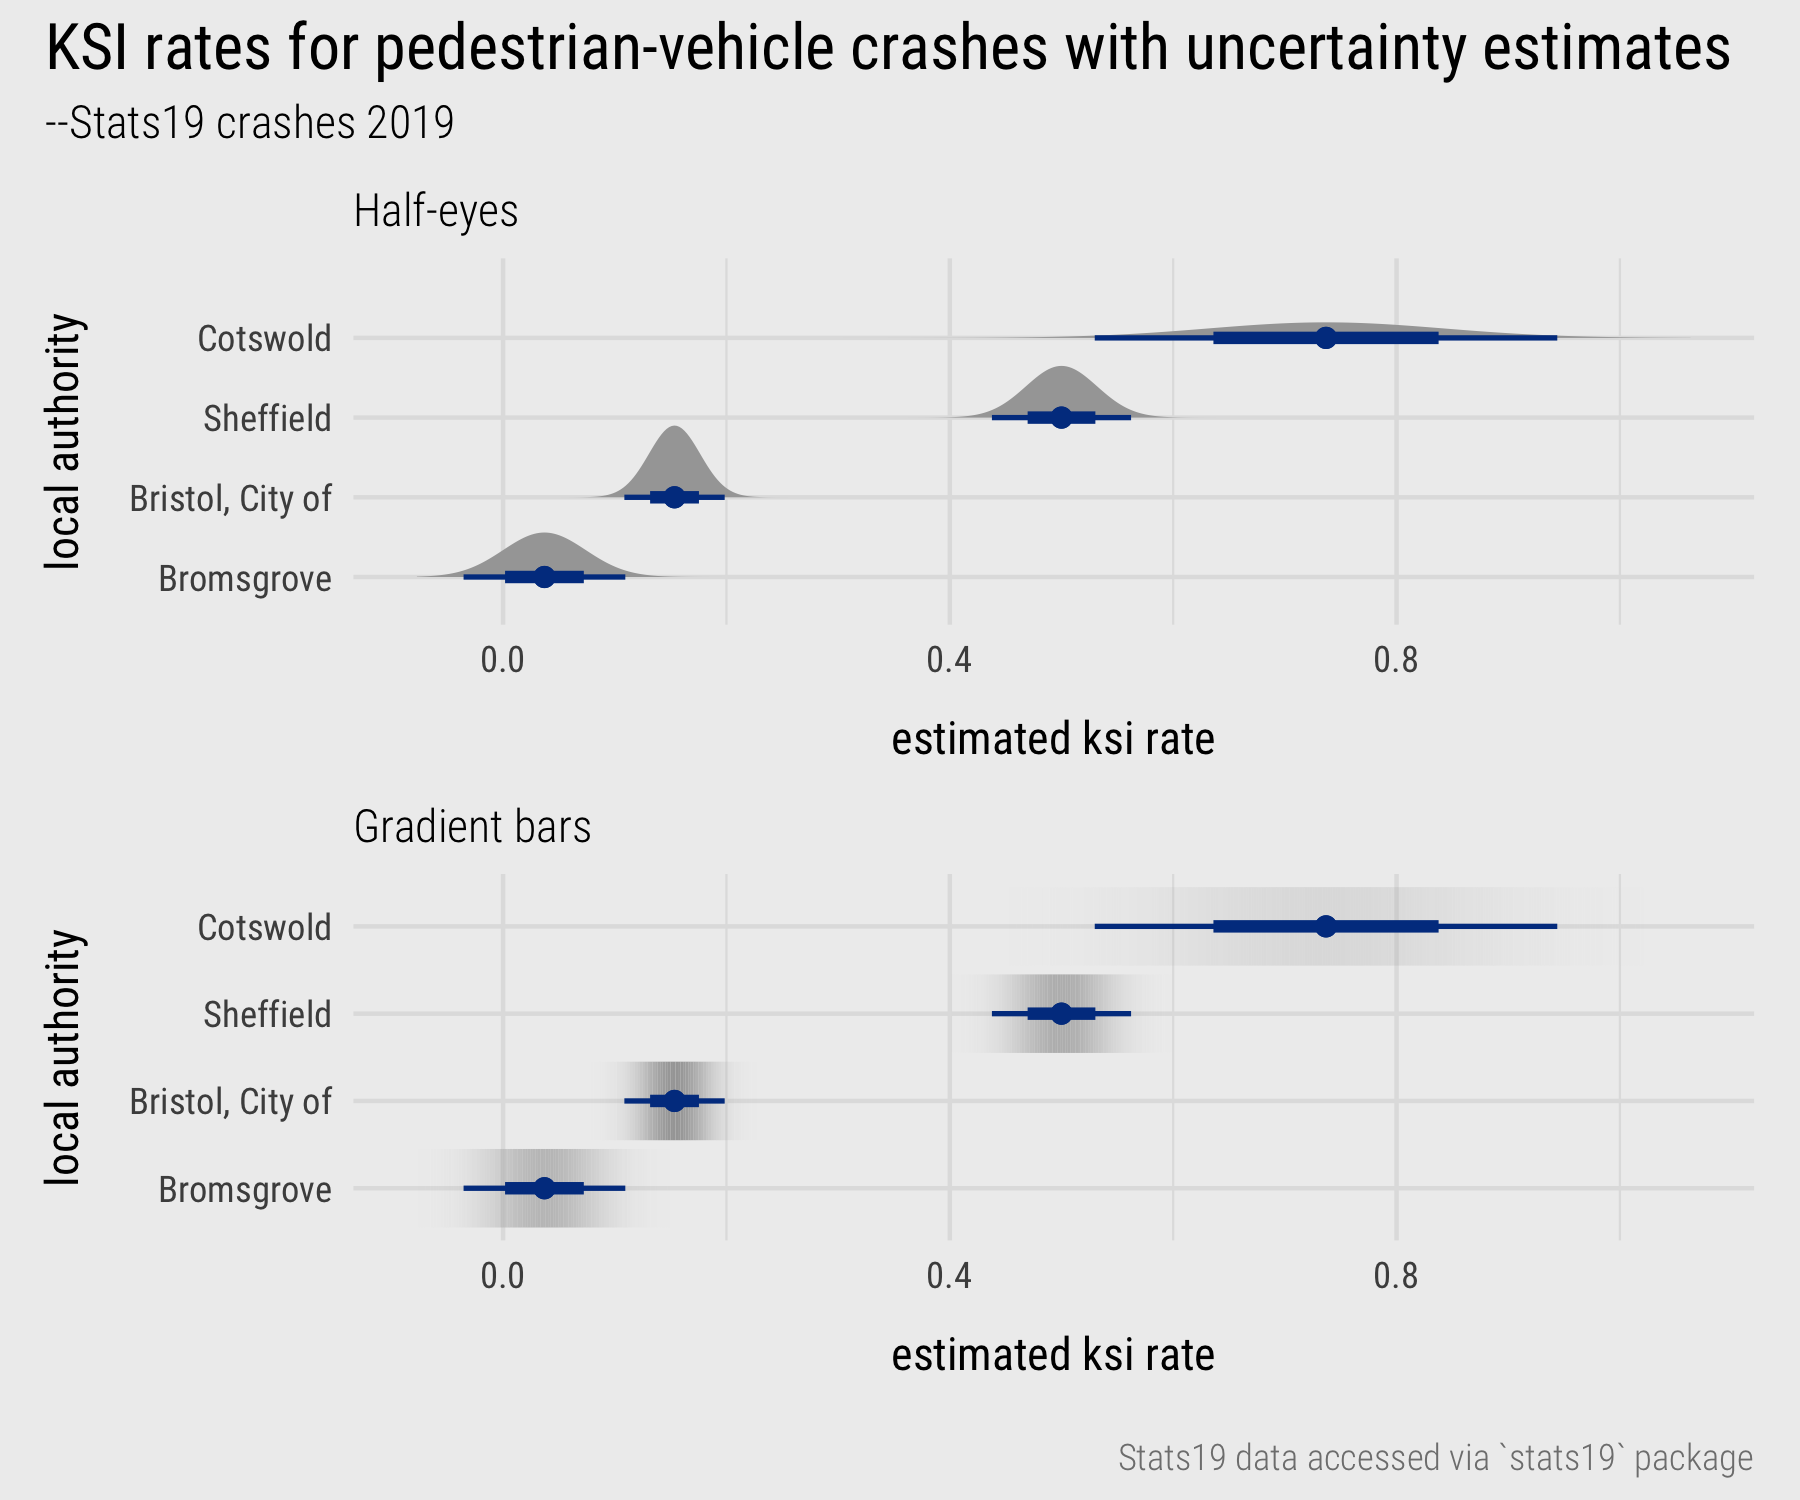 KSI rates for pedestrian-vehicle crashes in selected local authorities with uncertainty estimates.